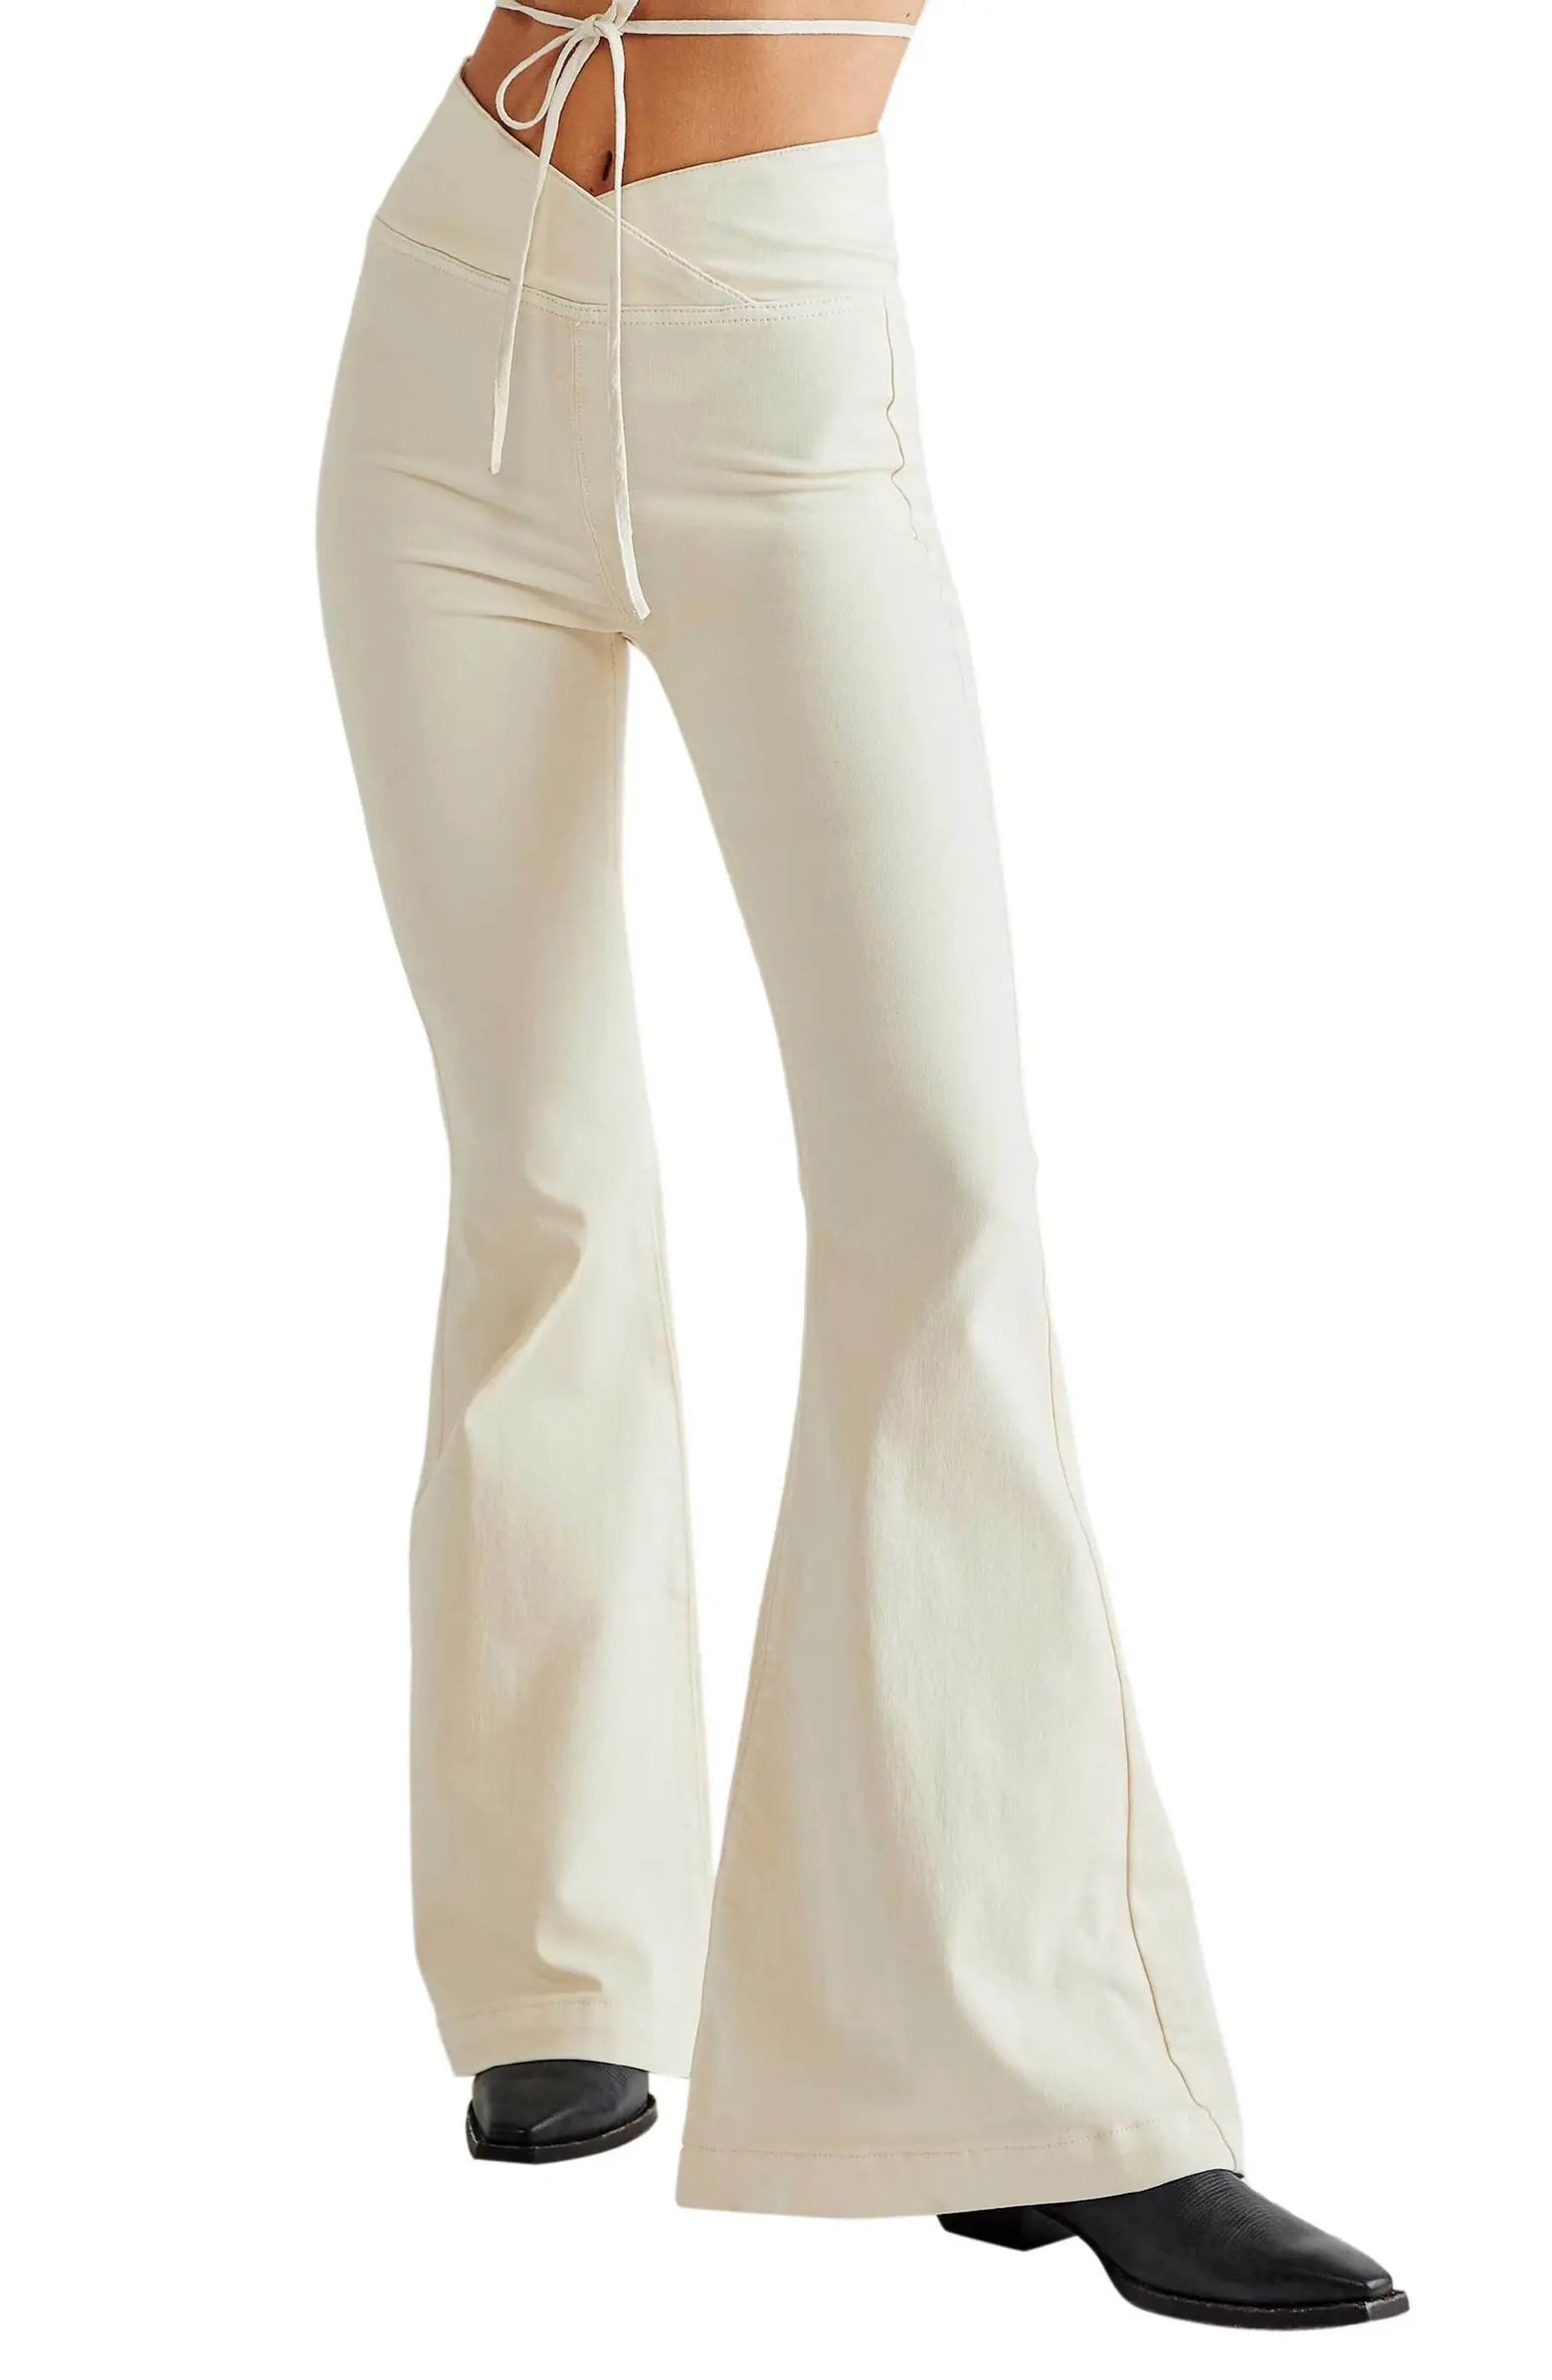 Free People Free People Venice Beach Flare Jeans in worn white.